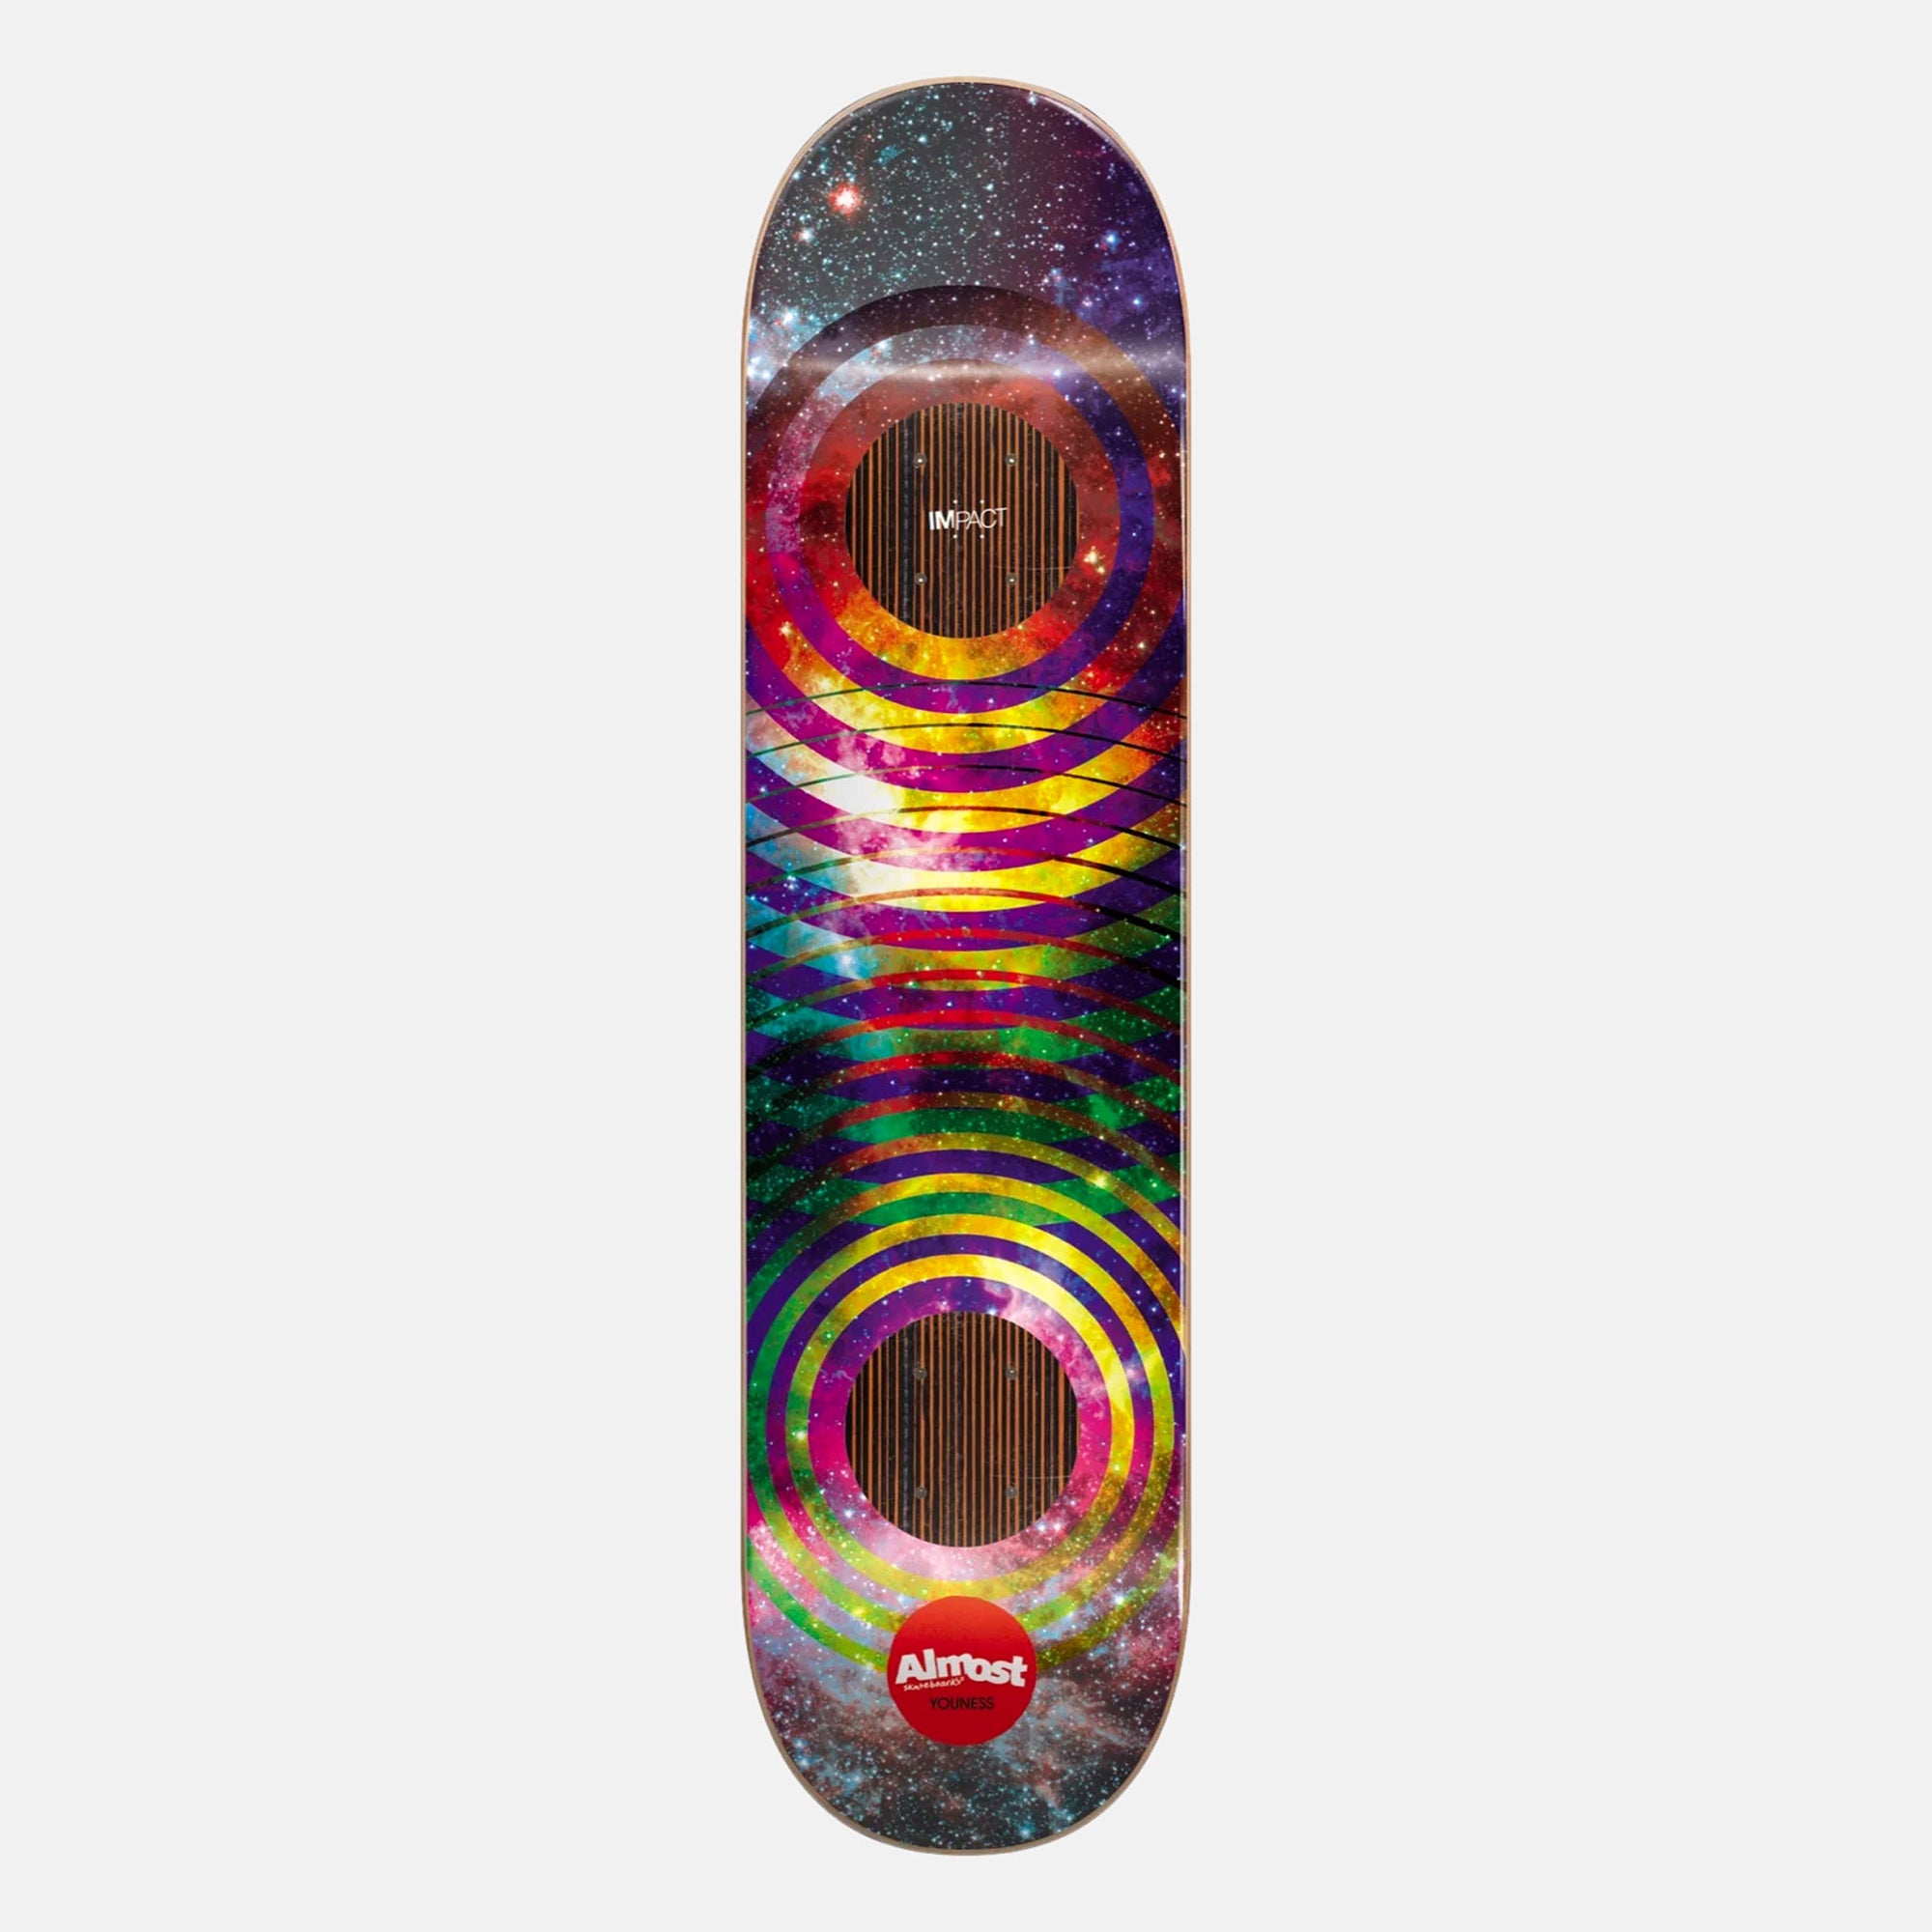 Almost Skateboards - 8.375" Youness Amrani Space Ring Resin 7 Deck